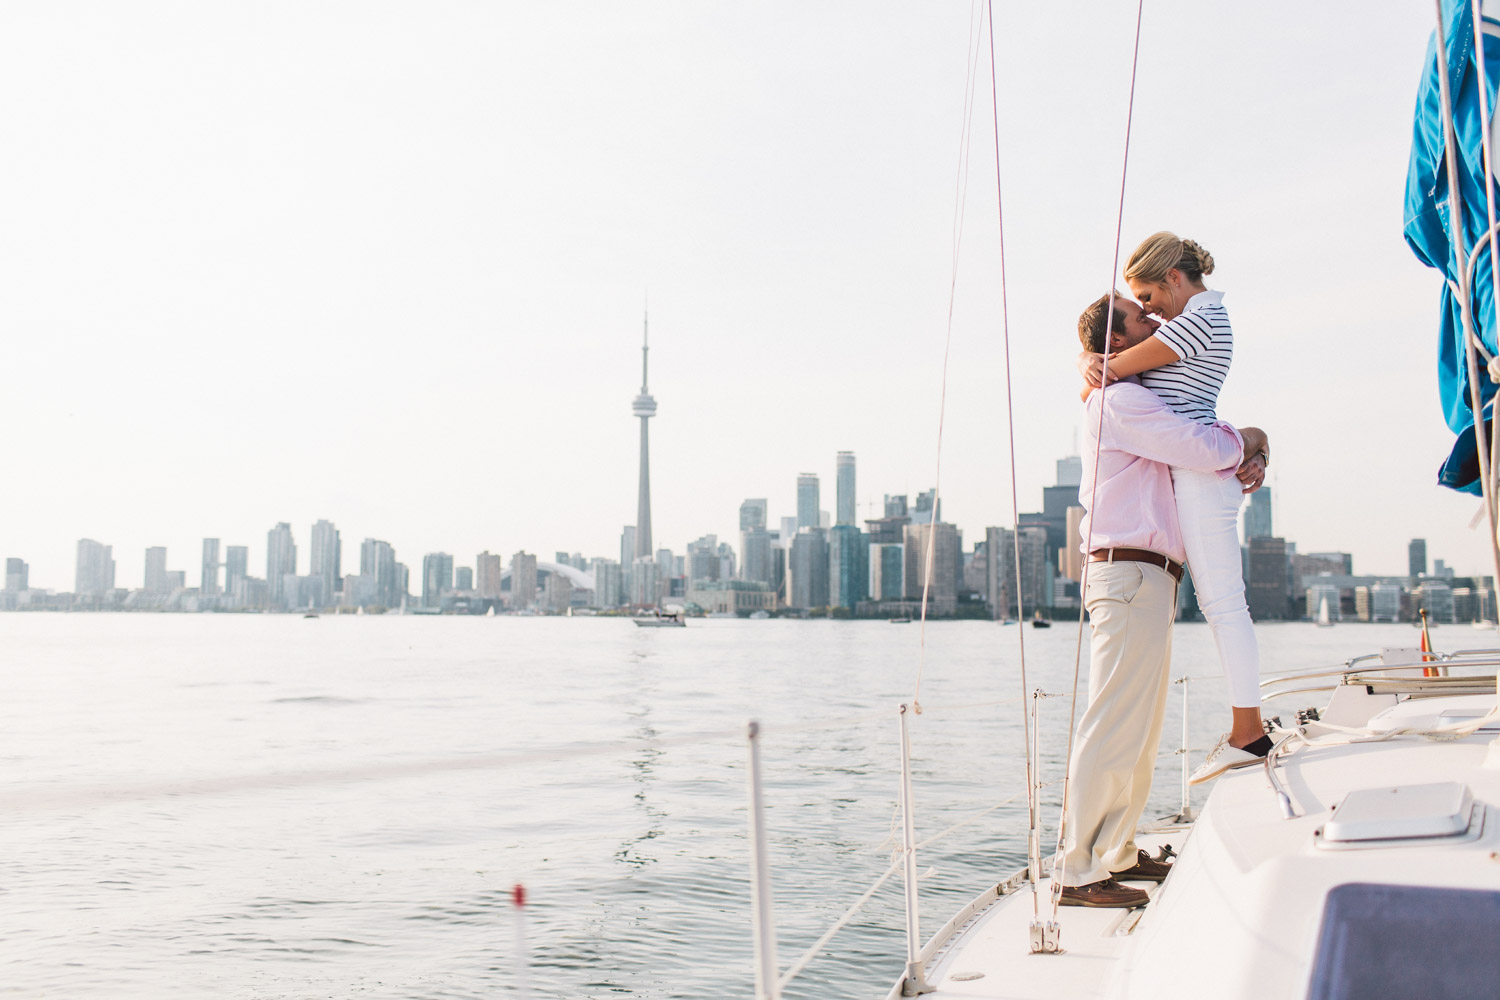 engagement photo on a yacht